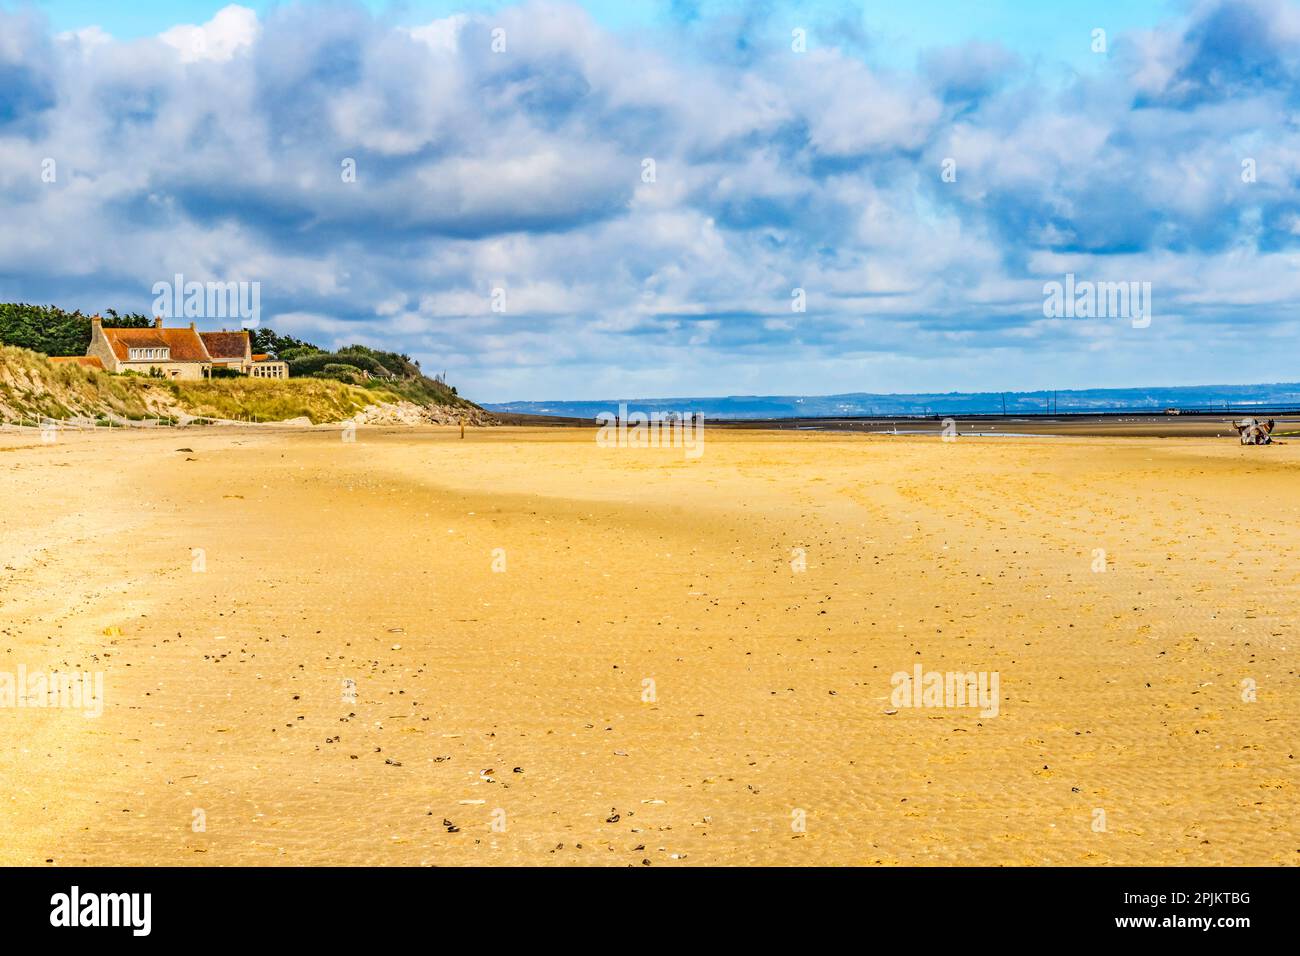 Houses and tractors, Utah Beach, Normandy, France. Stock Photo